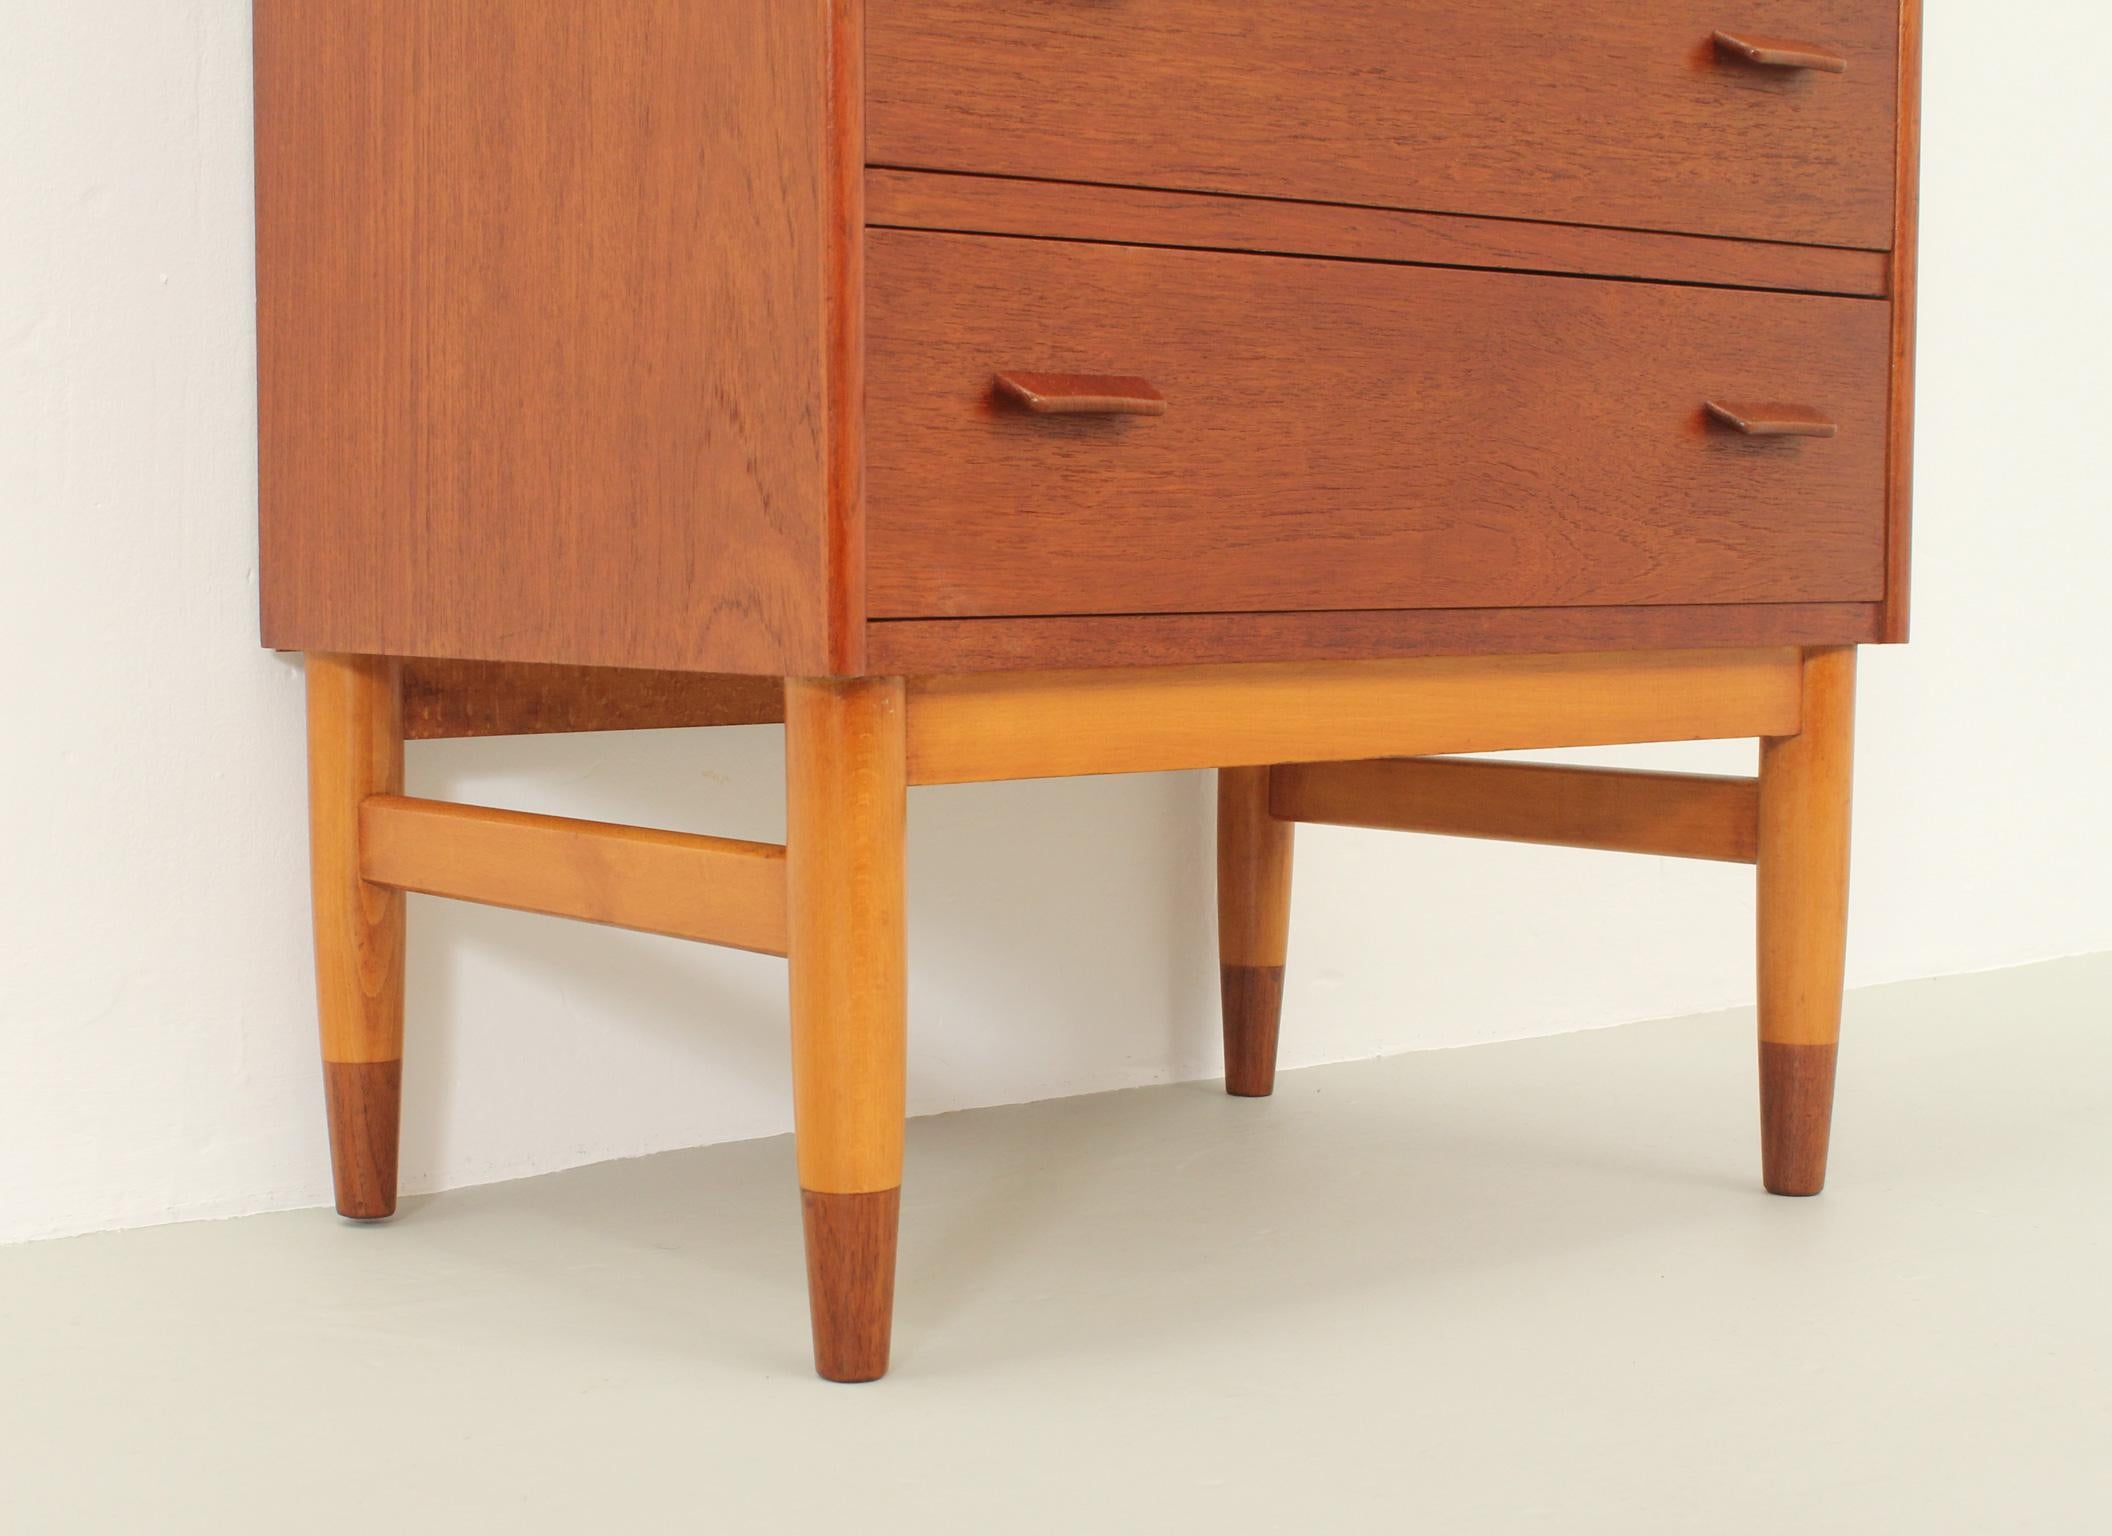 Oak Chest of Drawers by Carl Aage Skov for Munch Møbler, 1957 For Sale